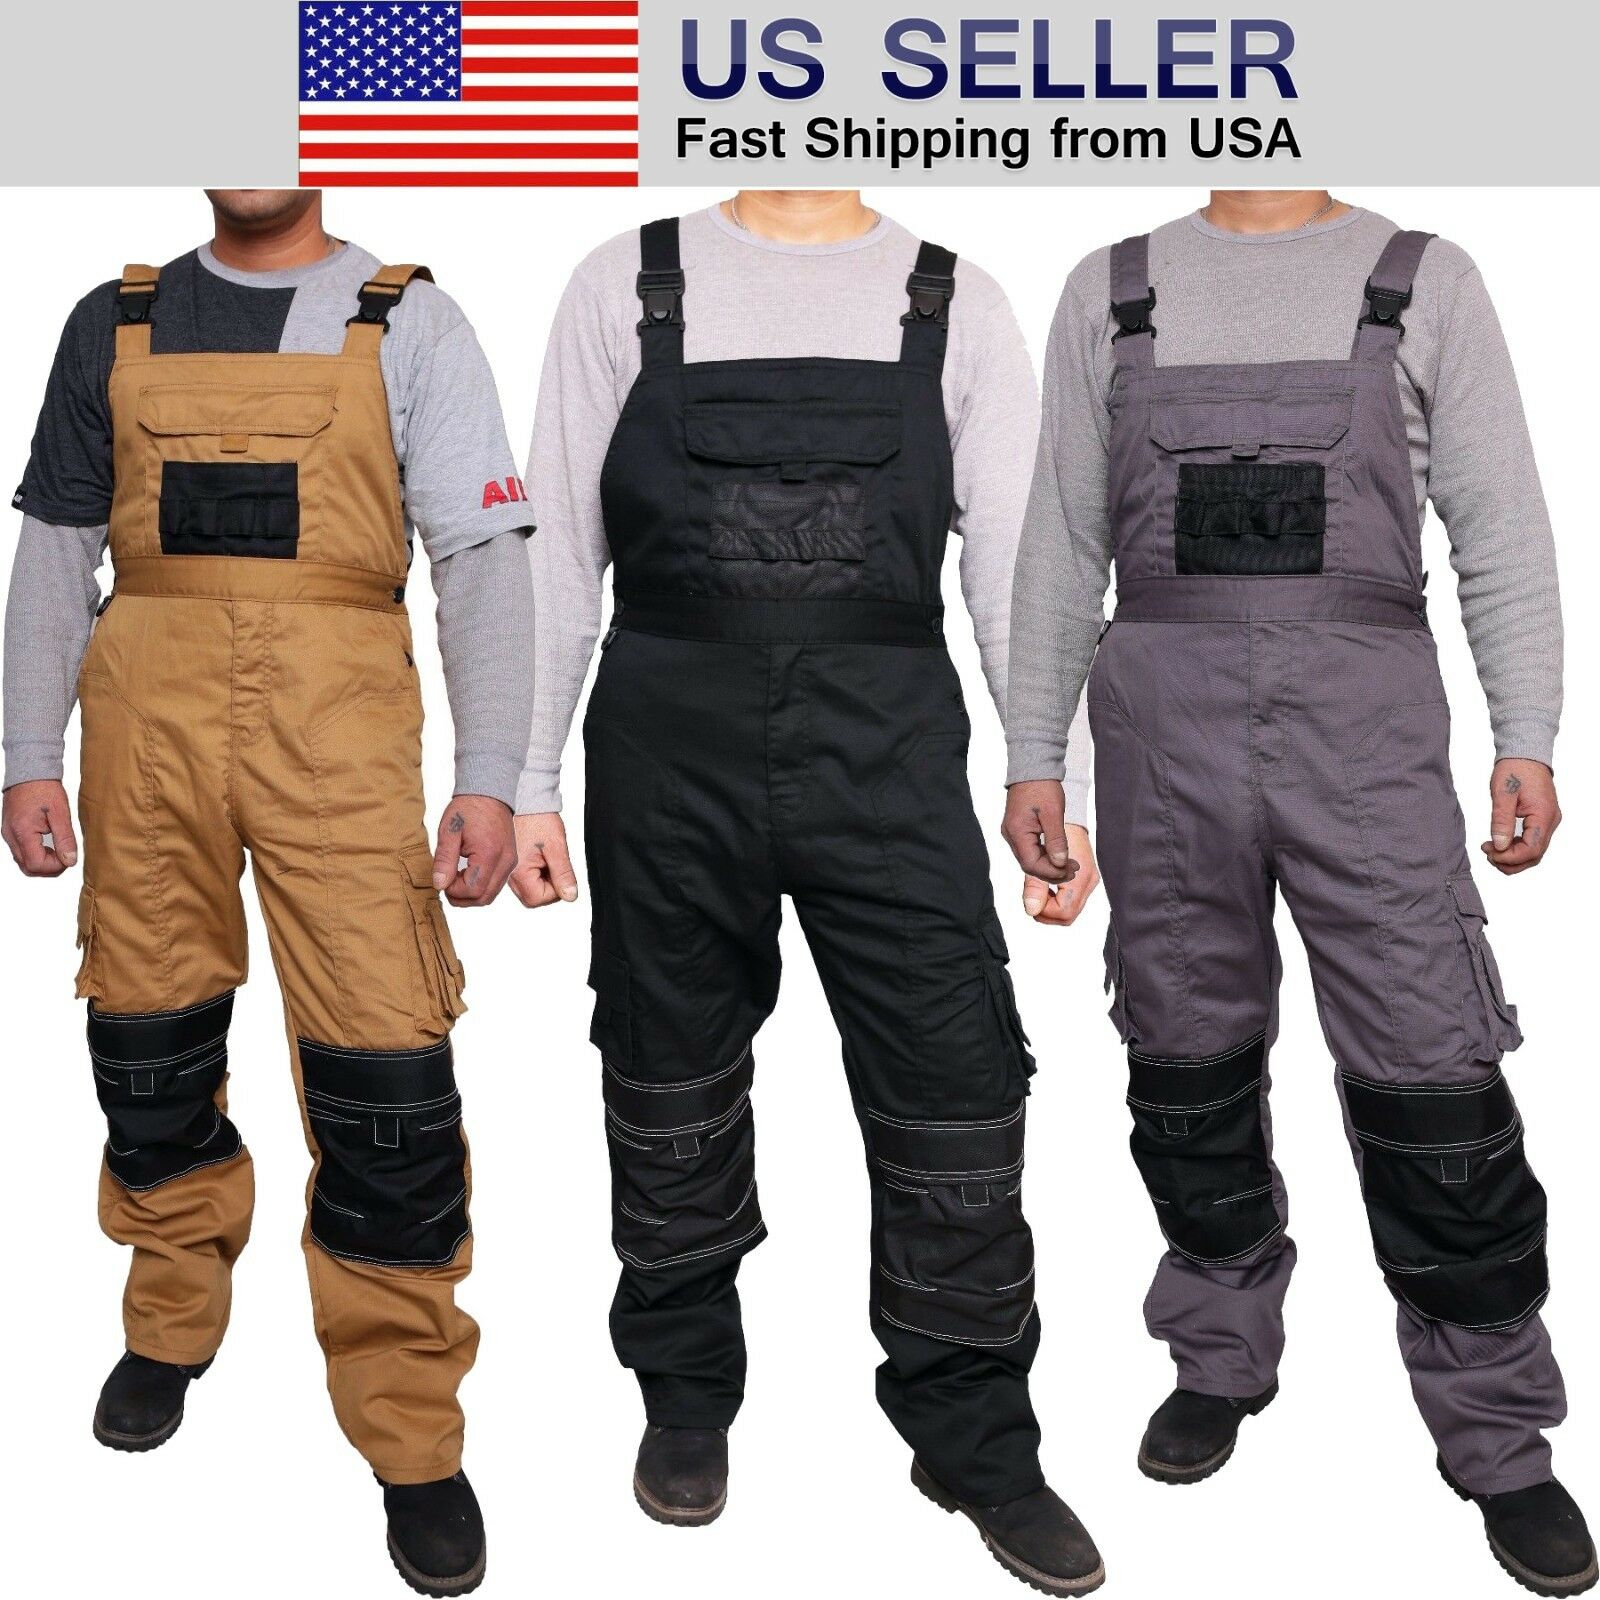 Mens Work Dungarees Working Trousers Bib And Brace Overall Multi Pockets Pants